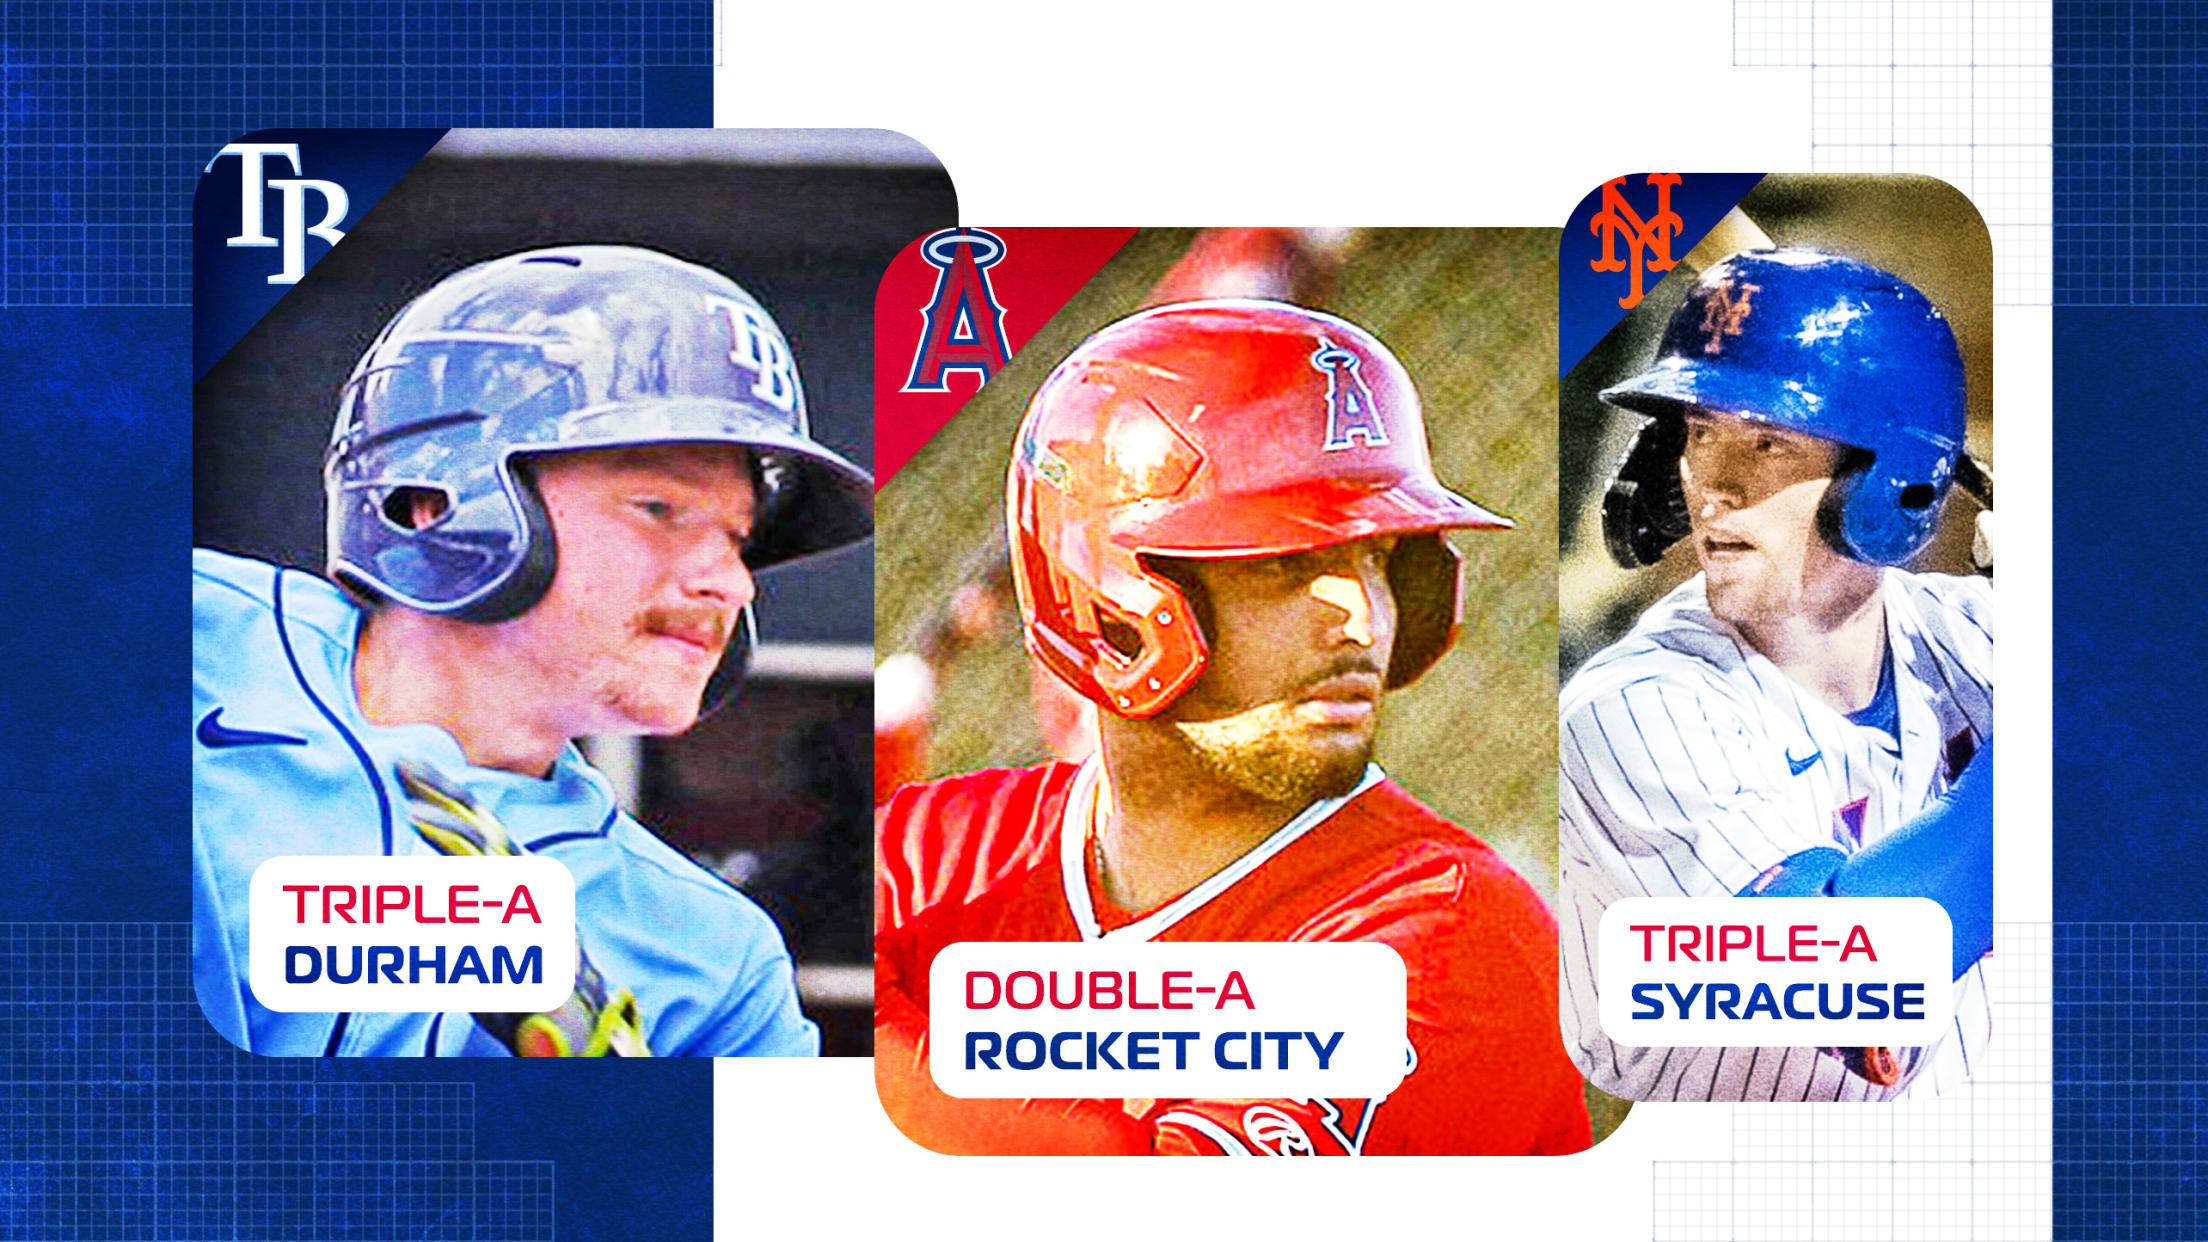 Three headshots: A Rays prospect at Triple-A Durham, an Angels prospect at Double-A Rocket City, and a Mets prospect at Triple-A Syracuse